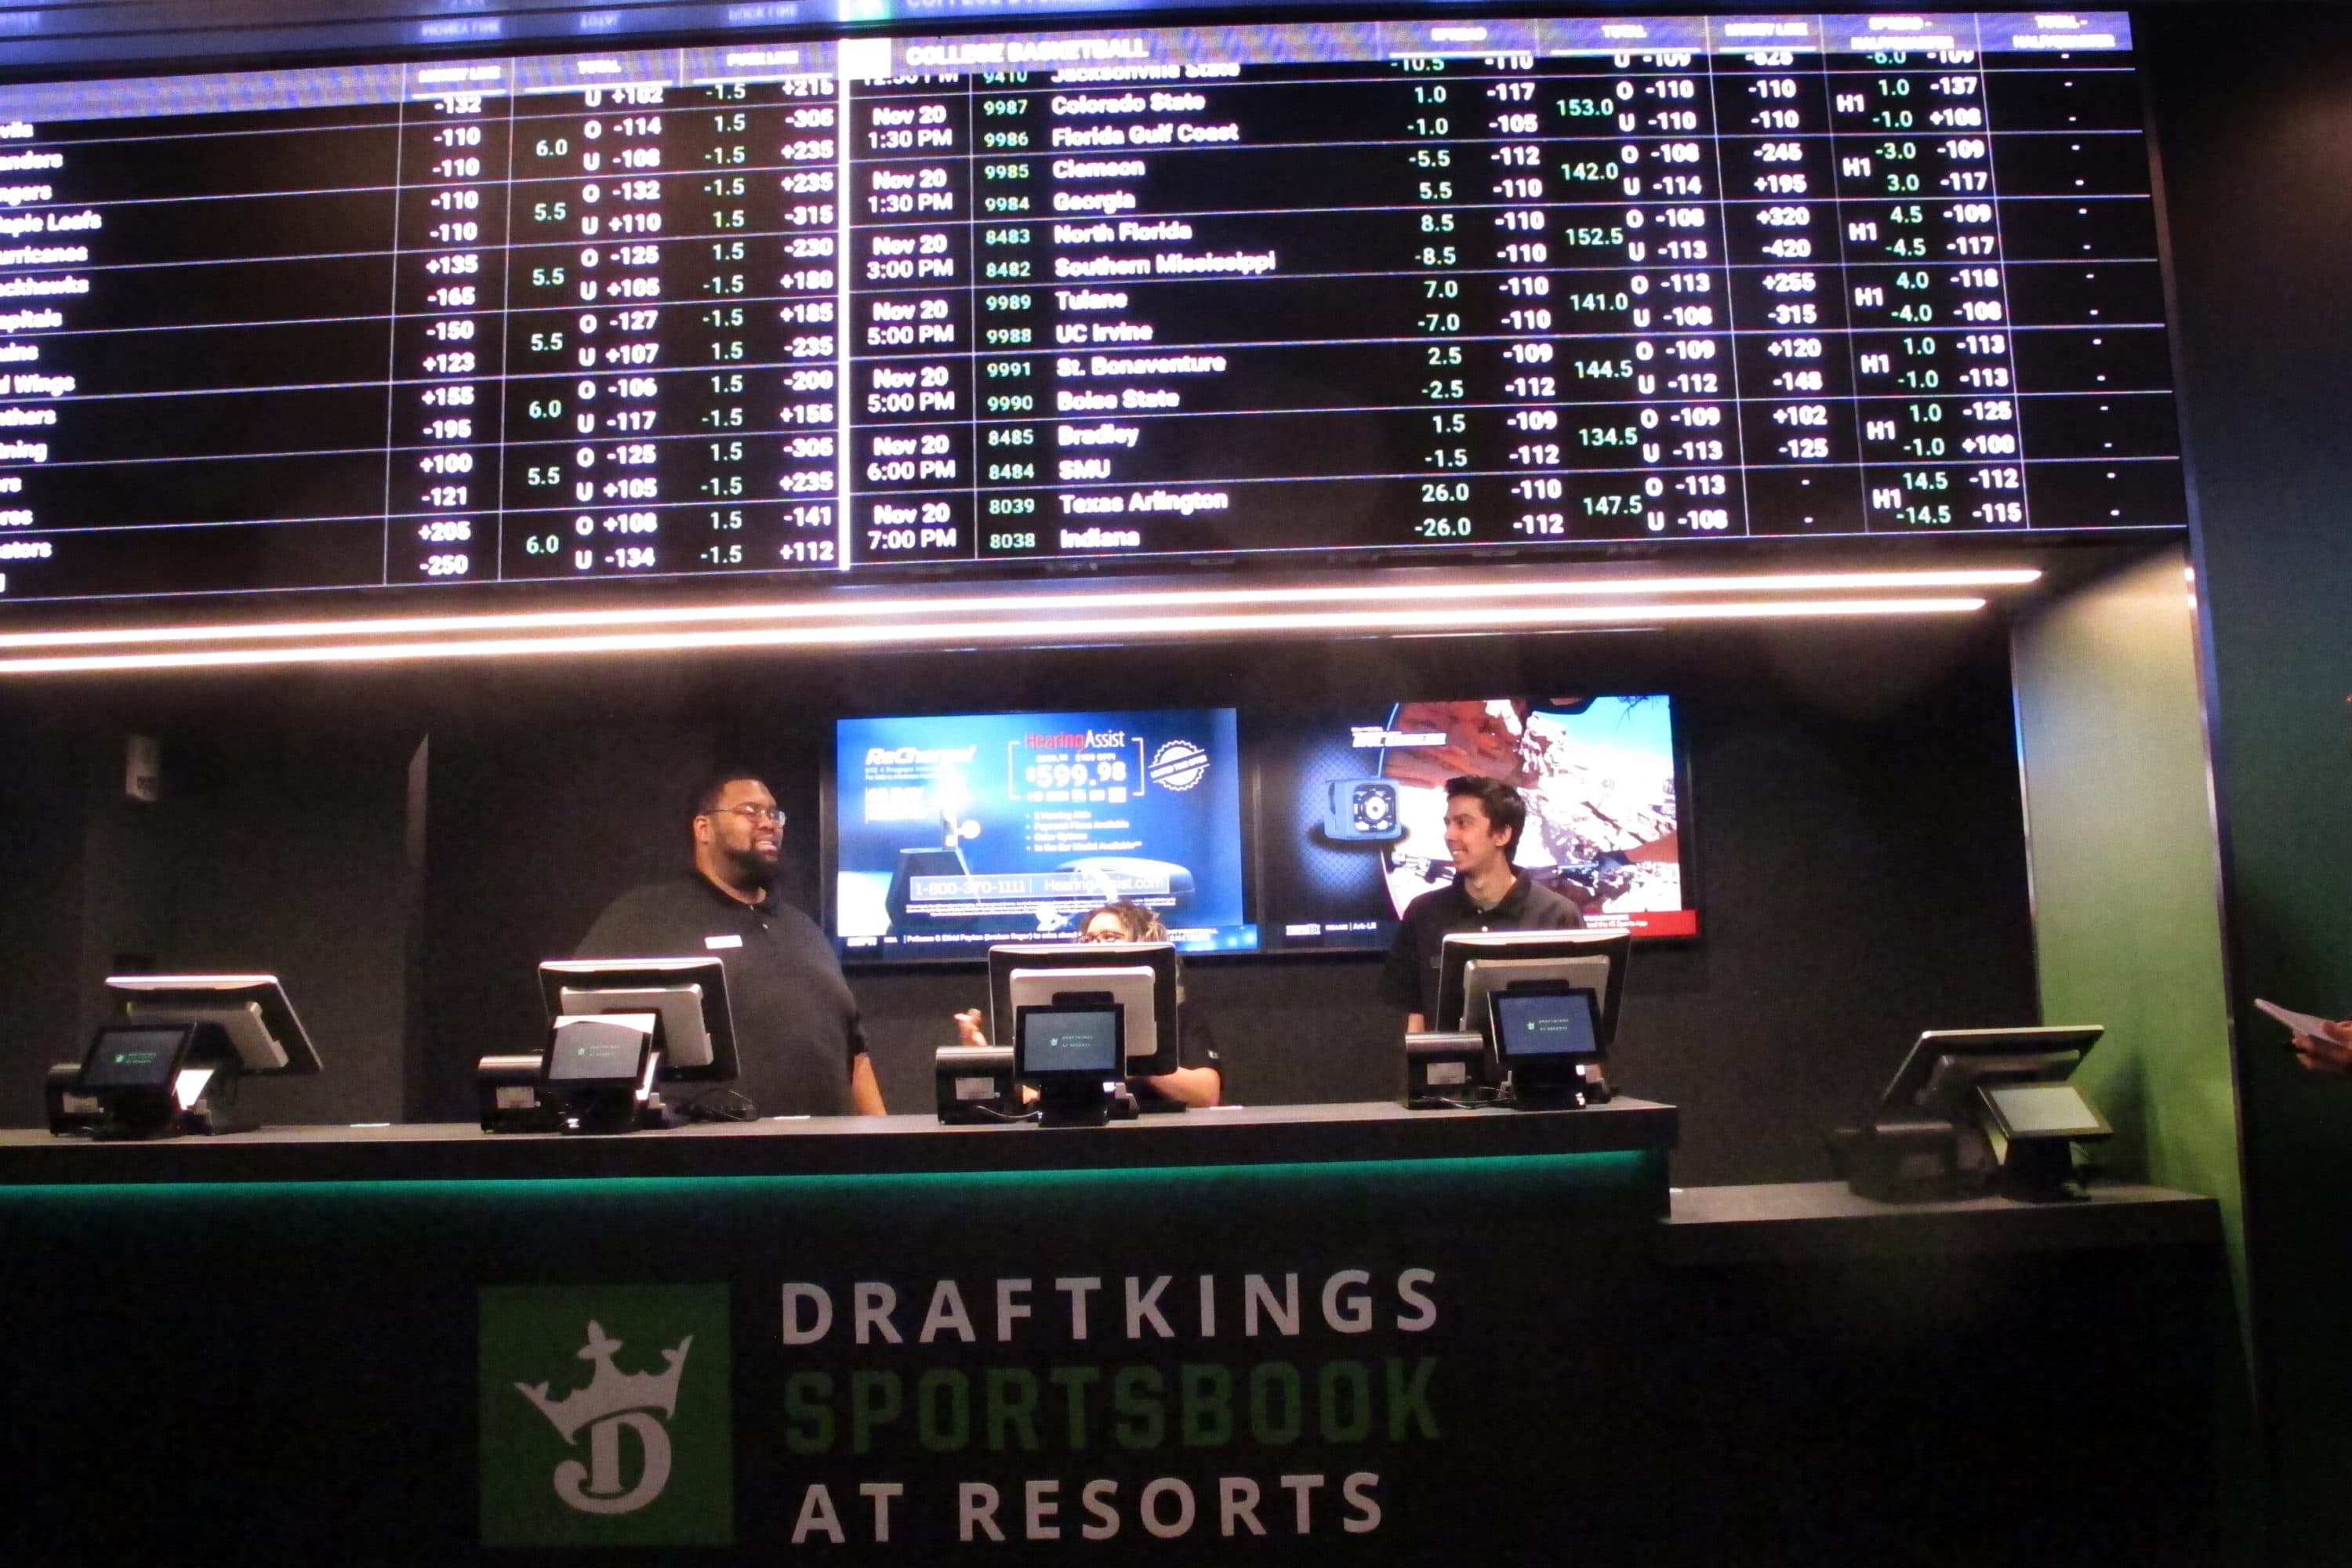 Employees work at the DraftKings sportsbook at Resorts Casino in Atlantic City, New Jersey, on November 20, 2018. (Wayne Parry/AP File)